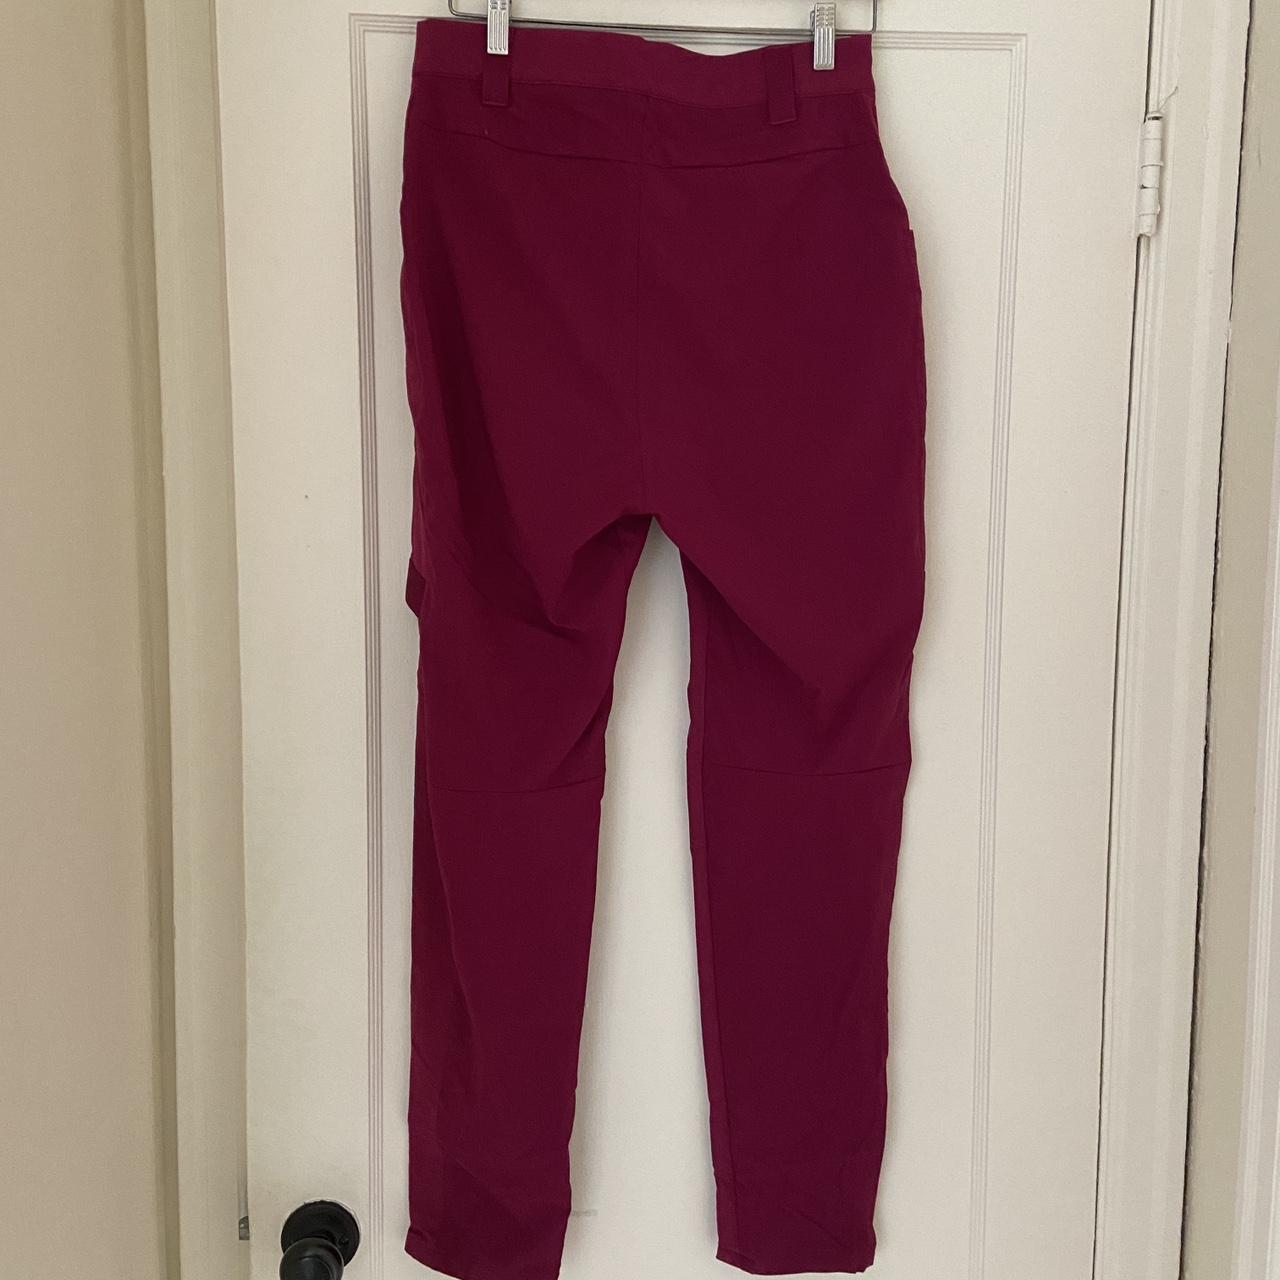 Adidas Women's Pink Trousers (2)